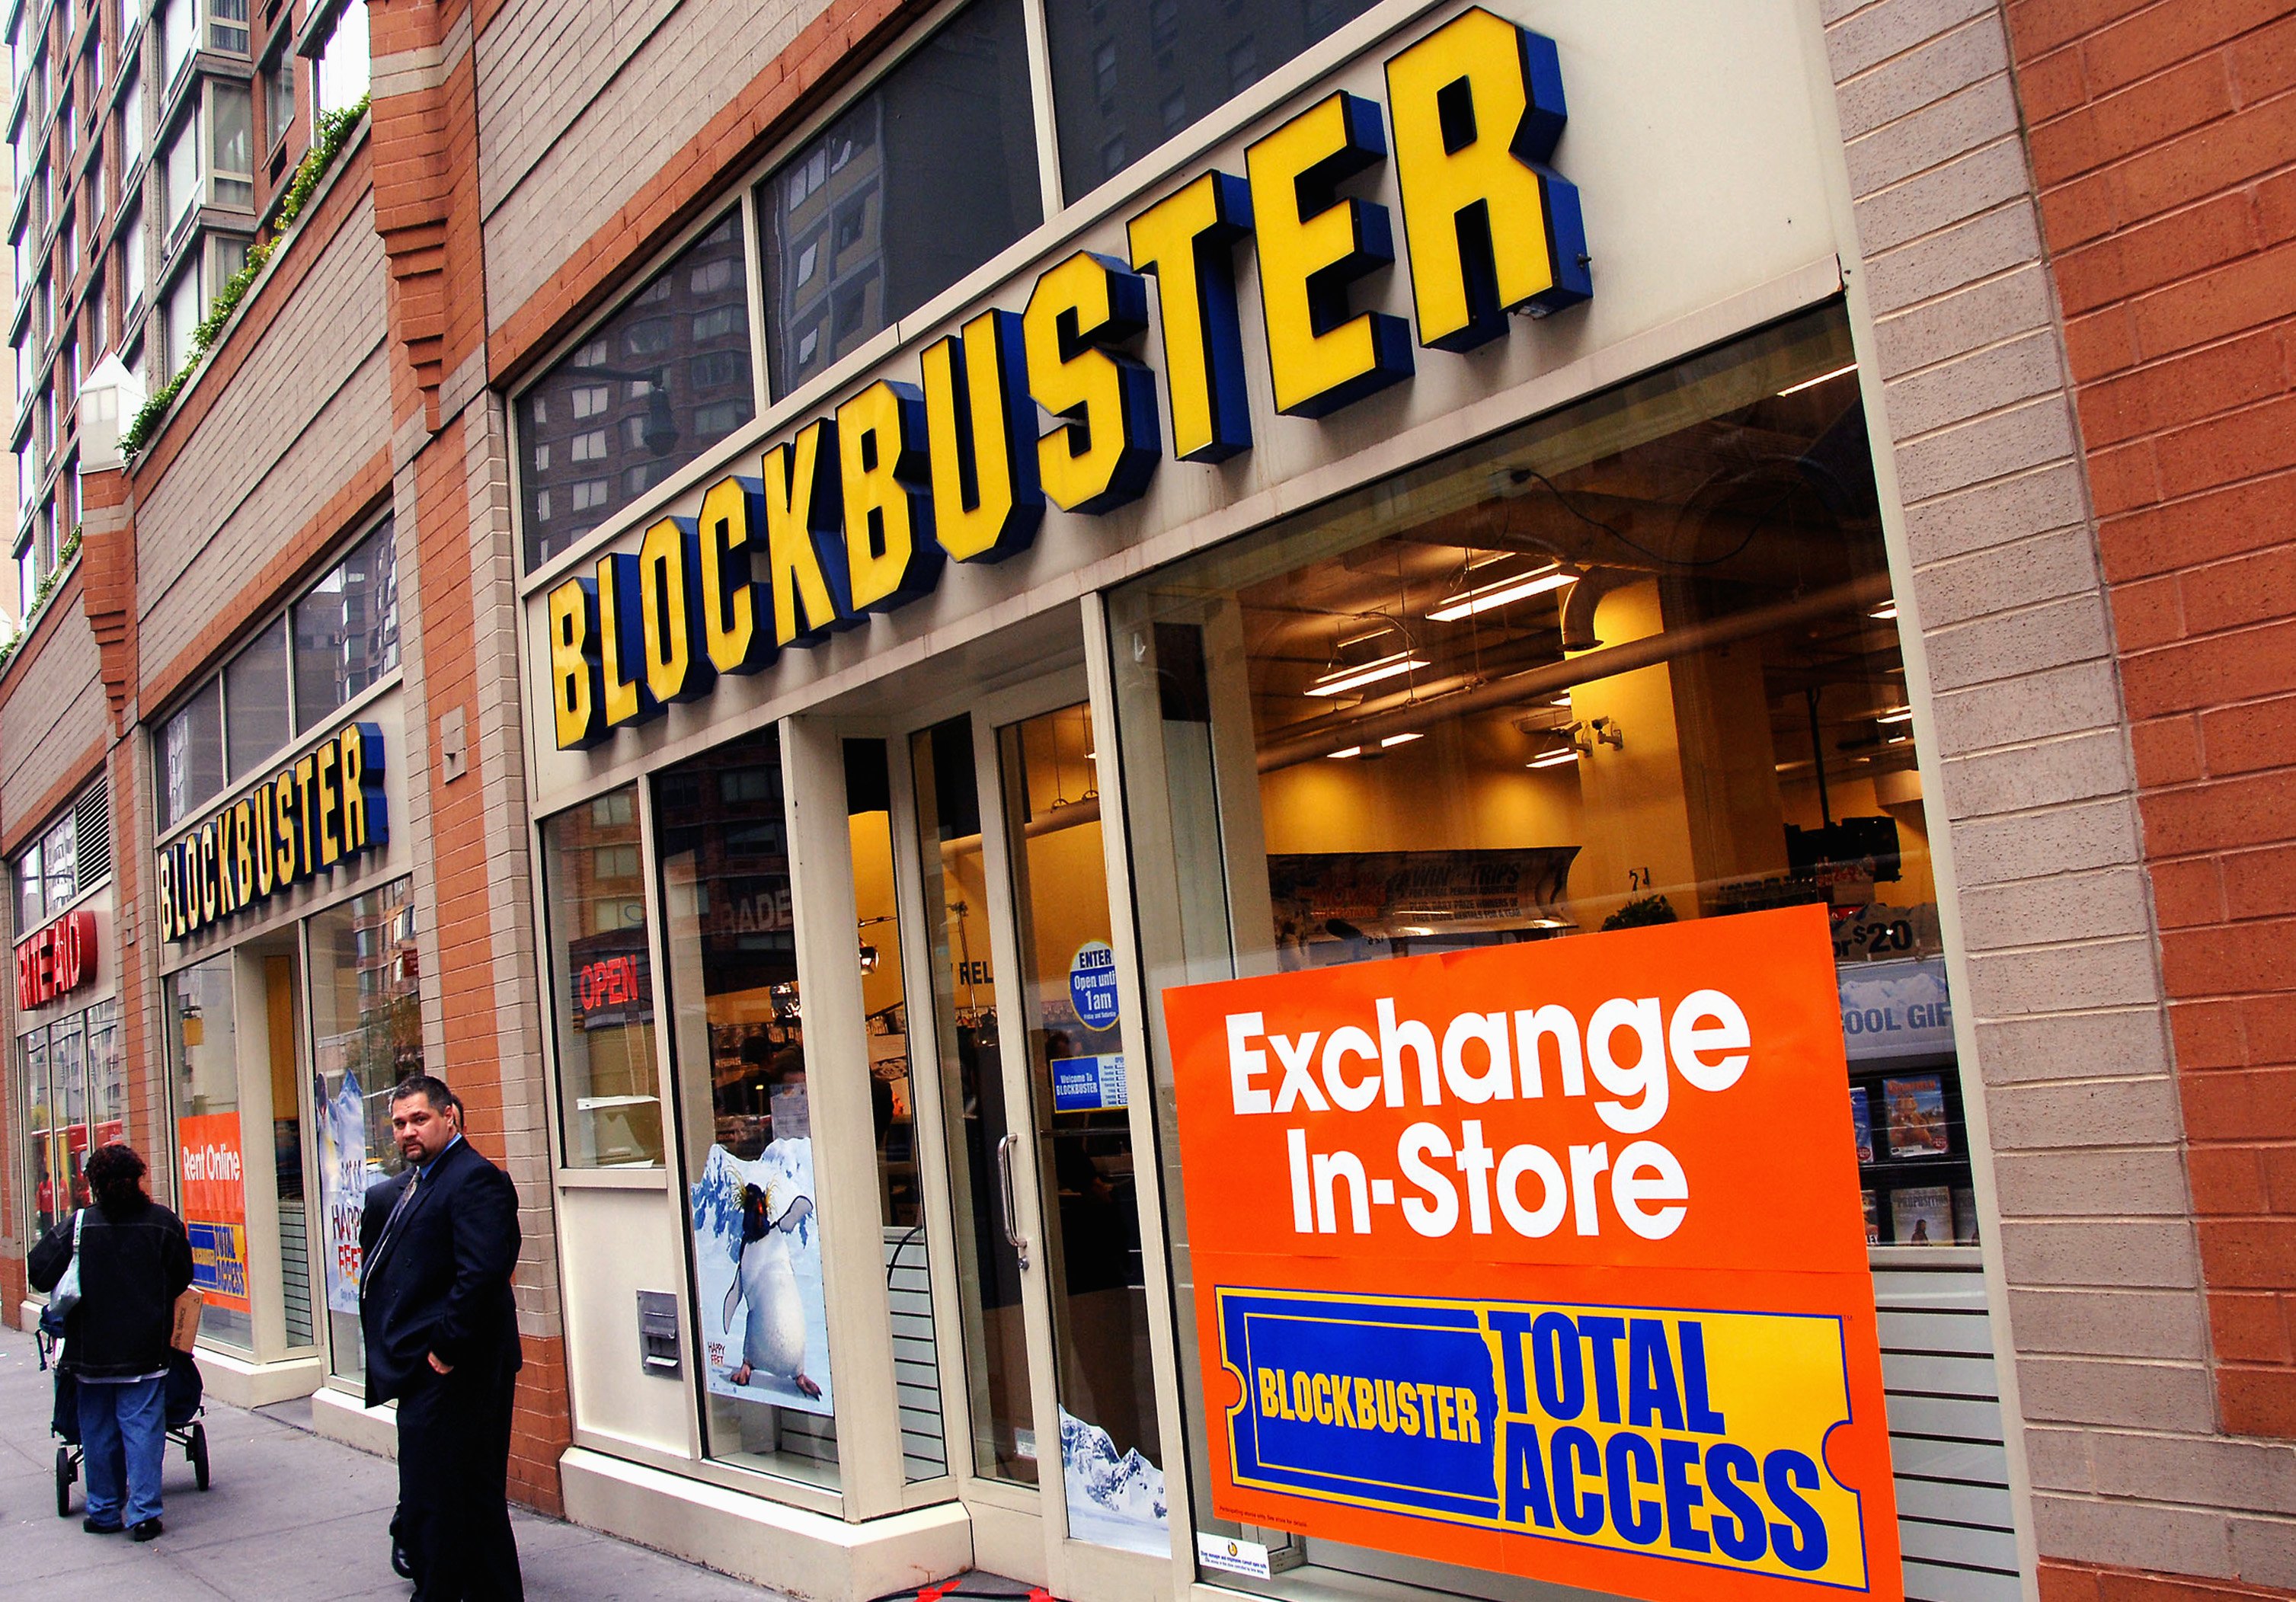 A Blockbuster store in the early 2000s.